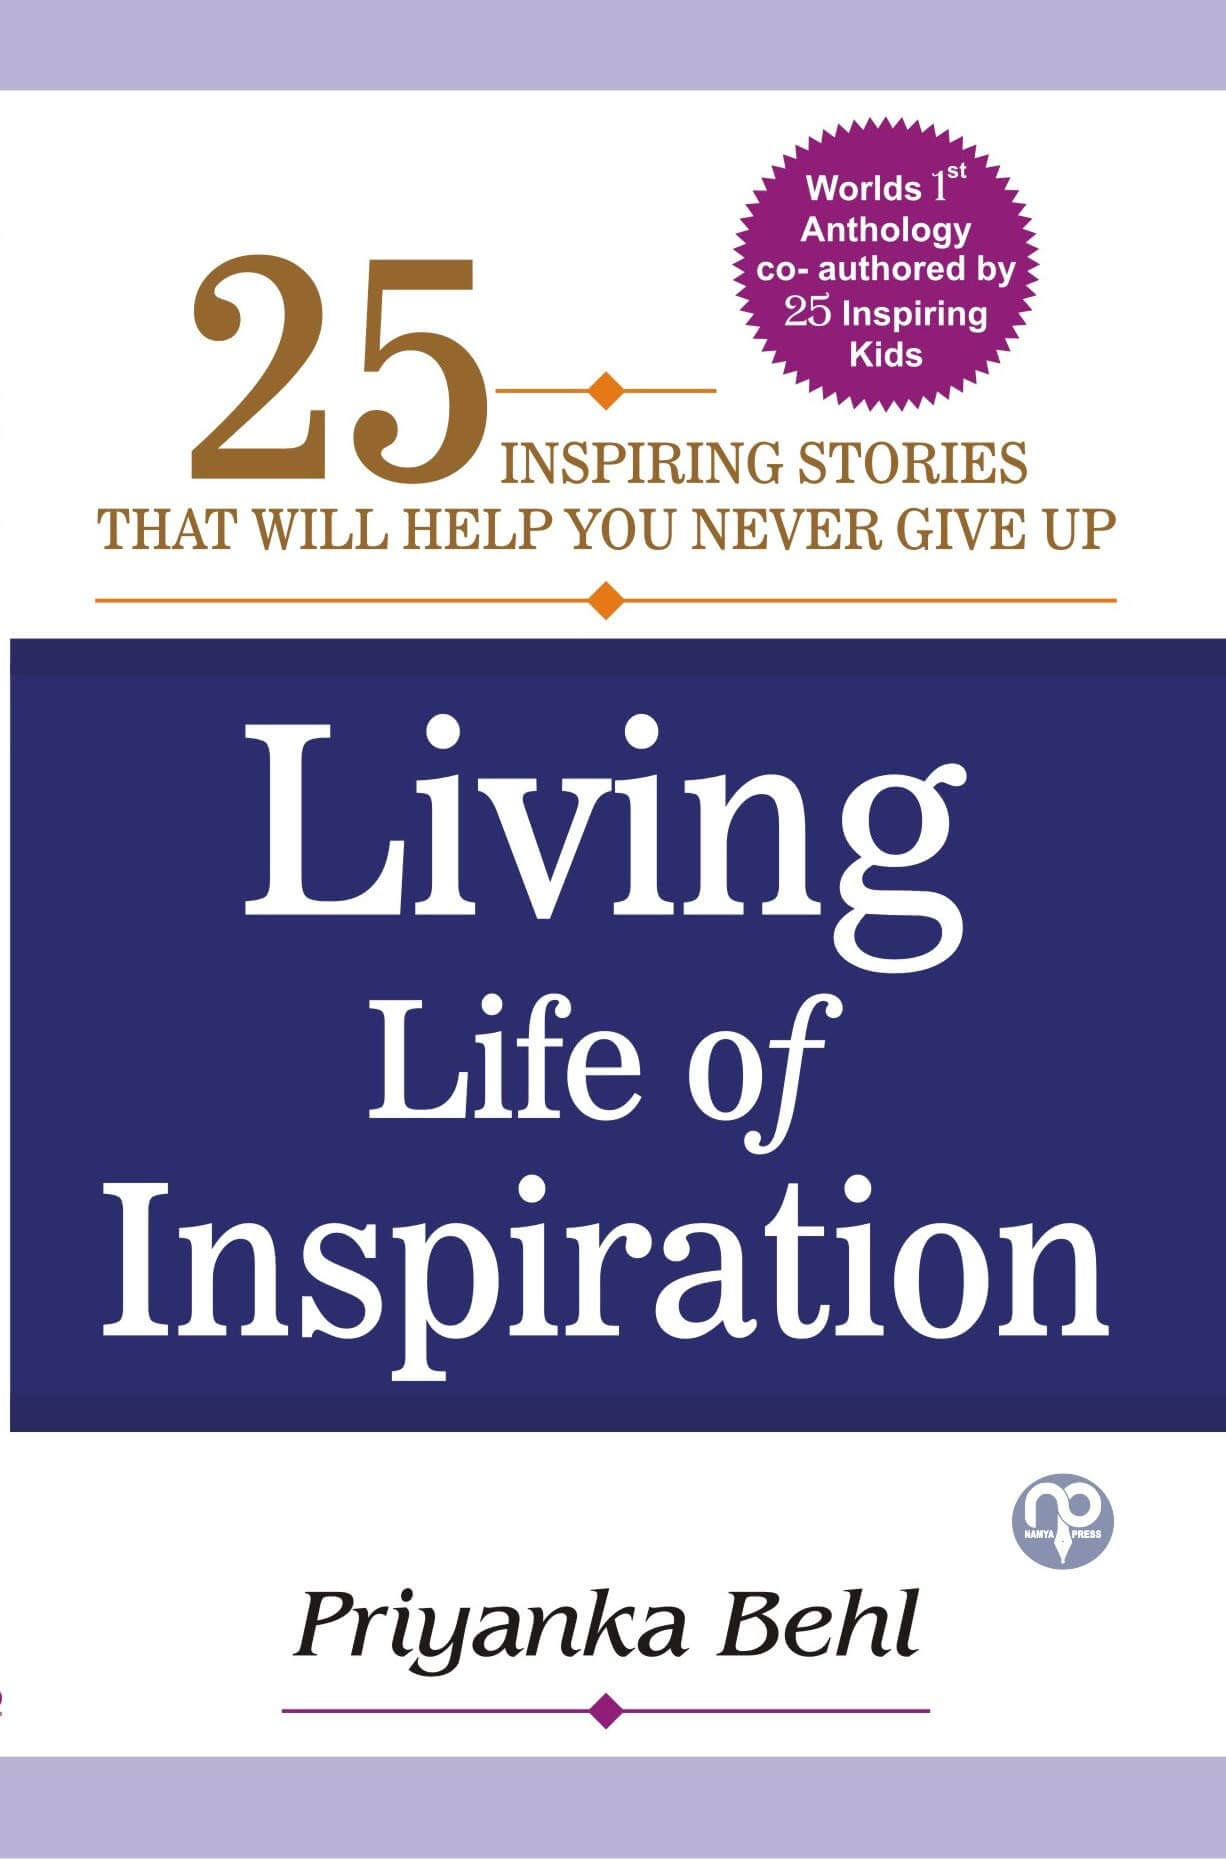 A picture of the book, "Living Life of Inspiration".